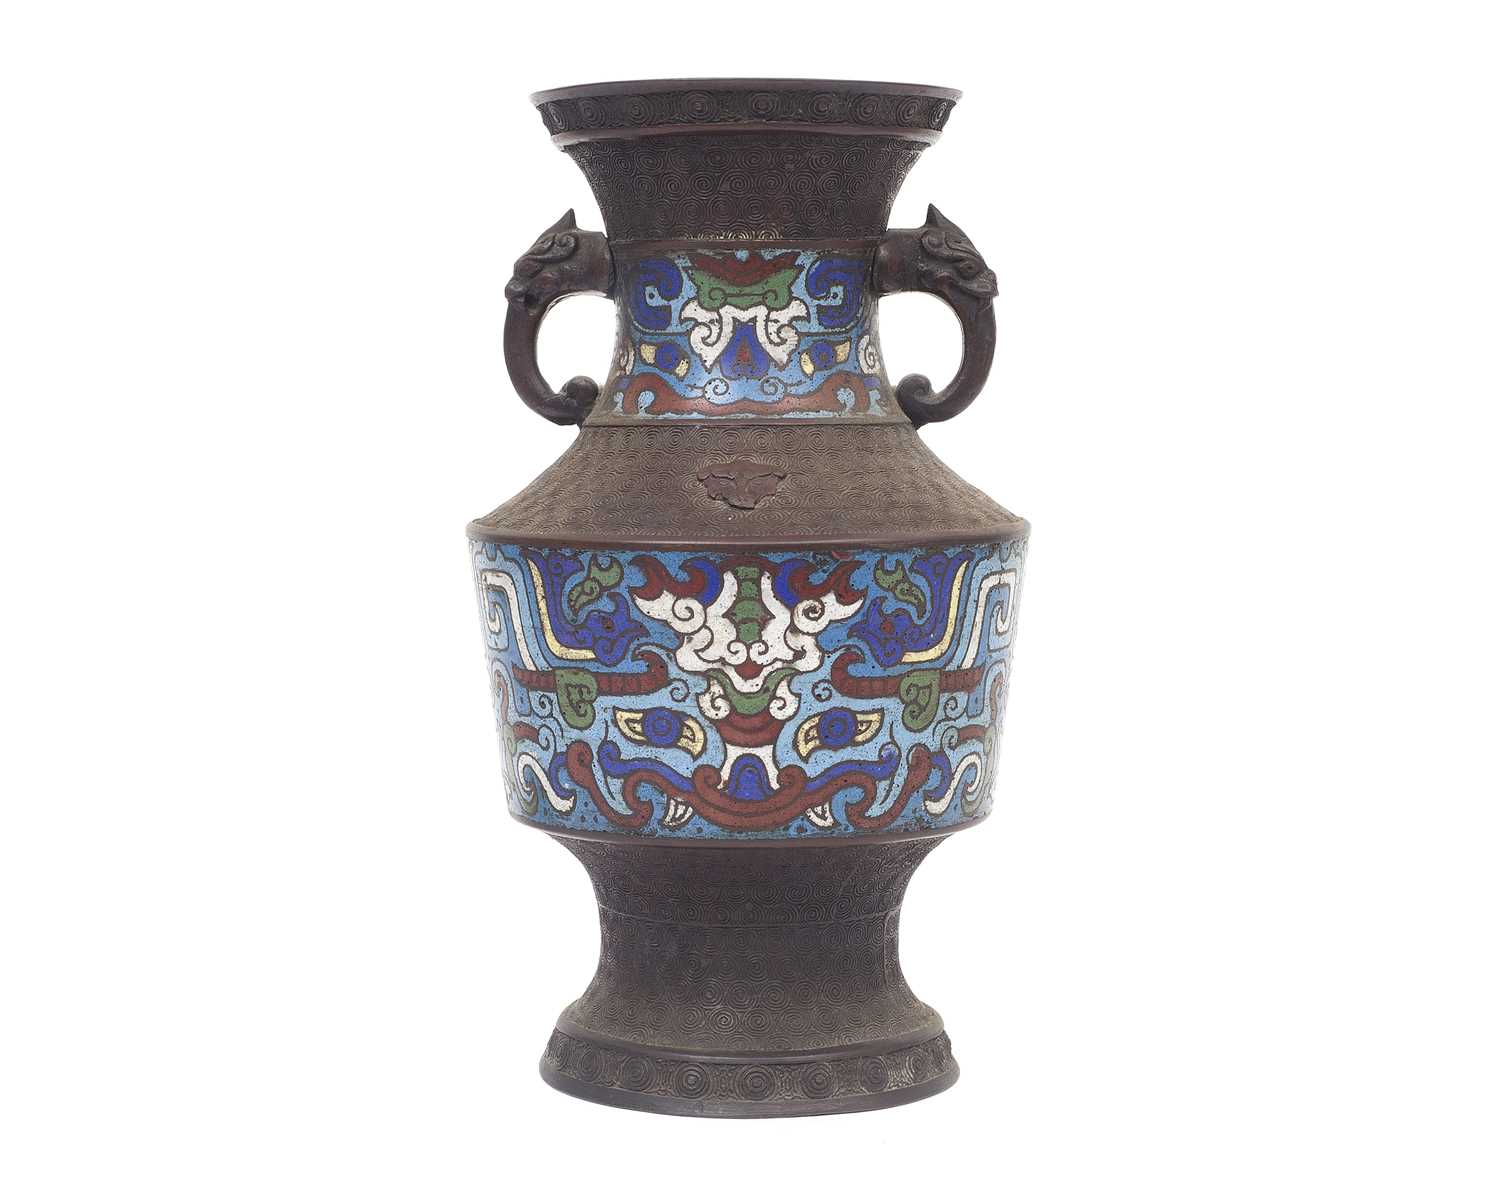 A CHINESE ARCHAIC STYLE BRONZE AND CLOISONNE ENAMEL VASE